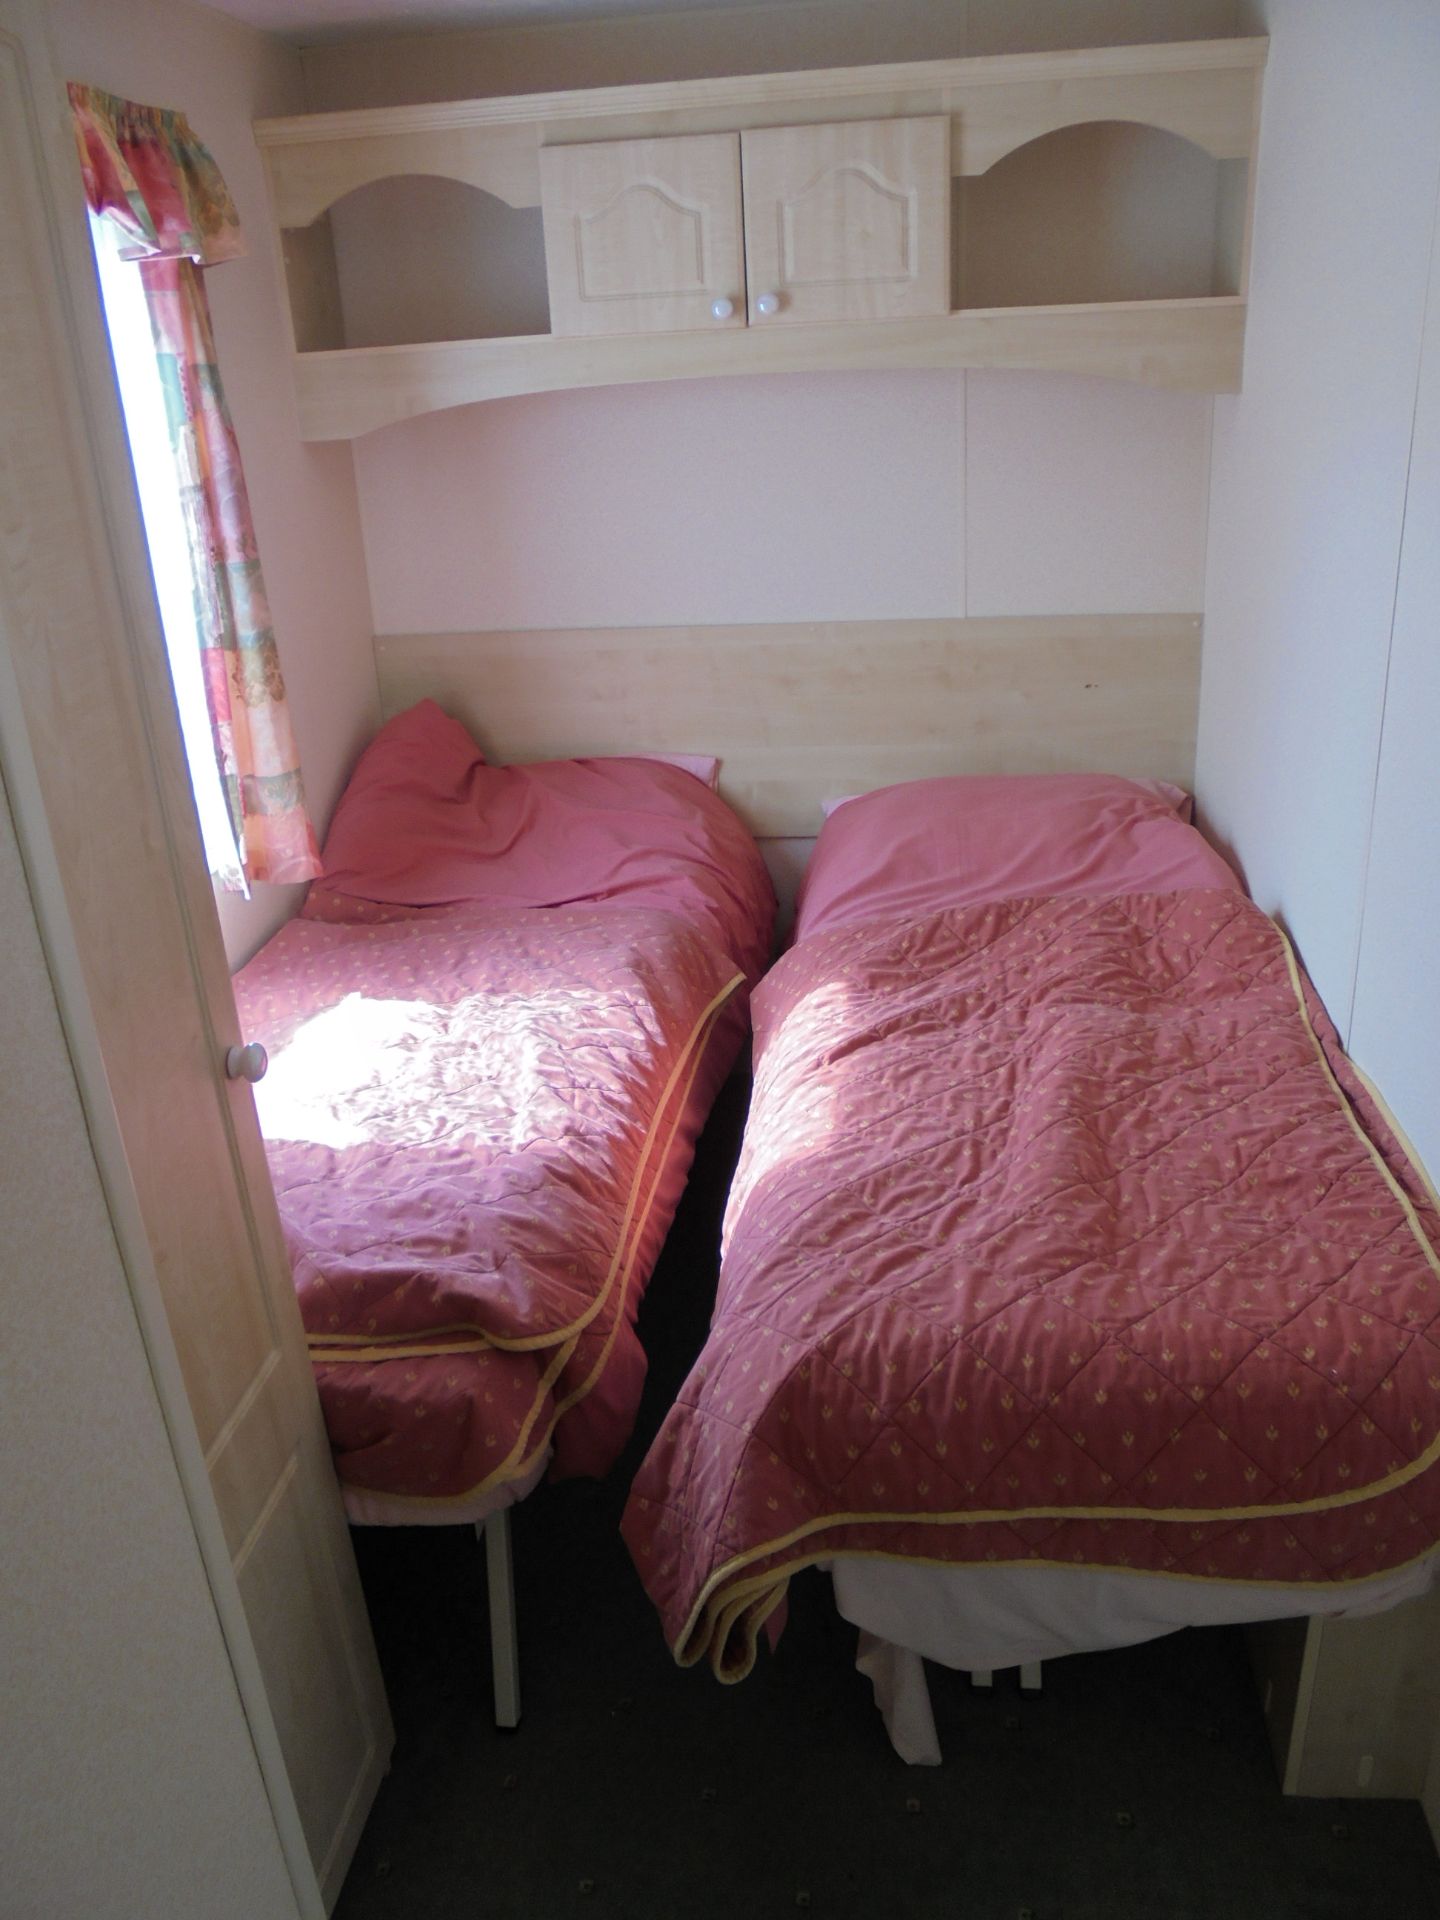 "WARRANT SATISFIED. 'LOT WITHDRAWN" BK Contessa Static Caravan. Size  32ft x 12ft, Year 2004. - Image 20 of 25